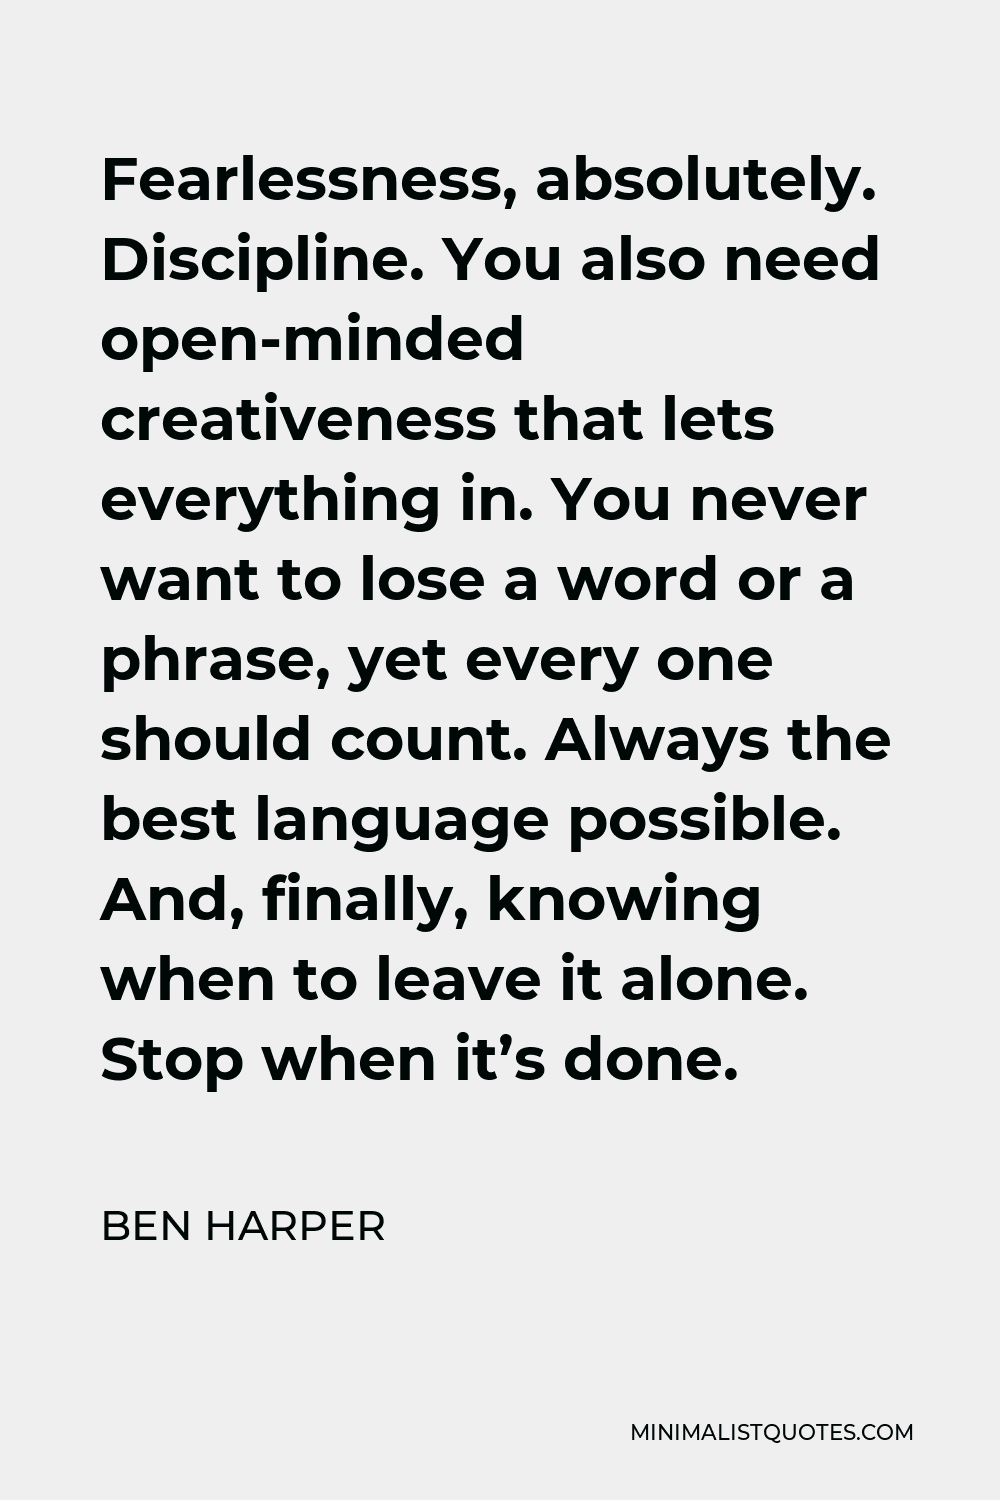 Ben Harper Quote - Fearlessness, absolutely. Discipline. You also need open-minded creativeness that lets everything in. You never want to lose a word or a phrase, yet every one should count. Always the best language possible. And, finally, knowing when to leave it alone. Stop when it’s done.